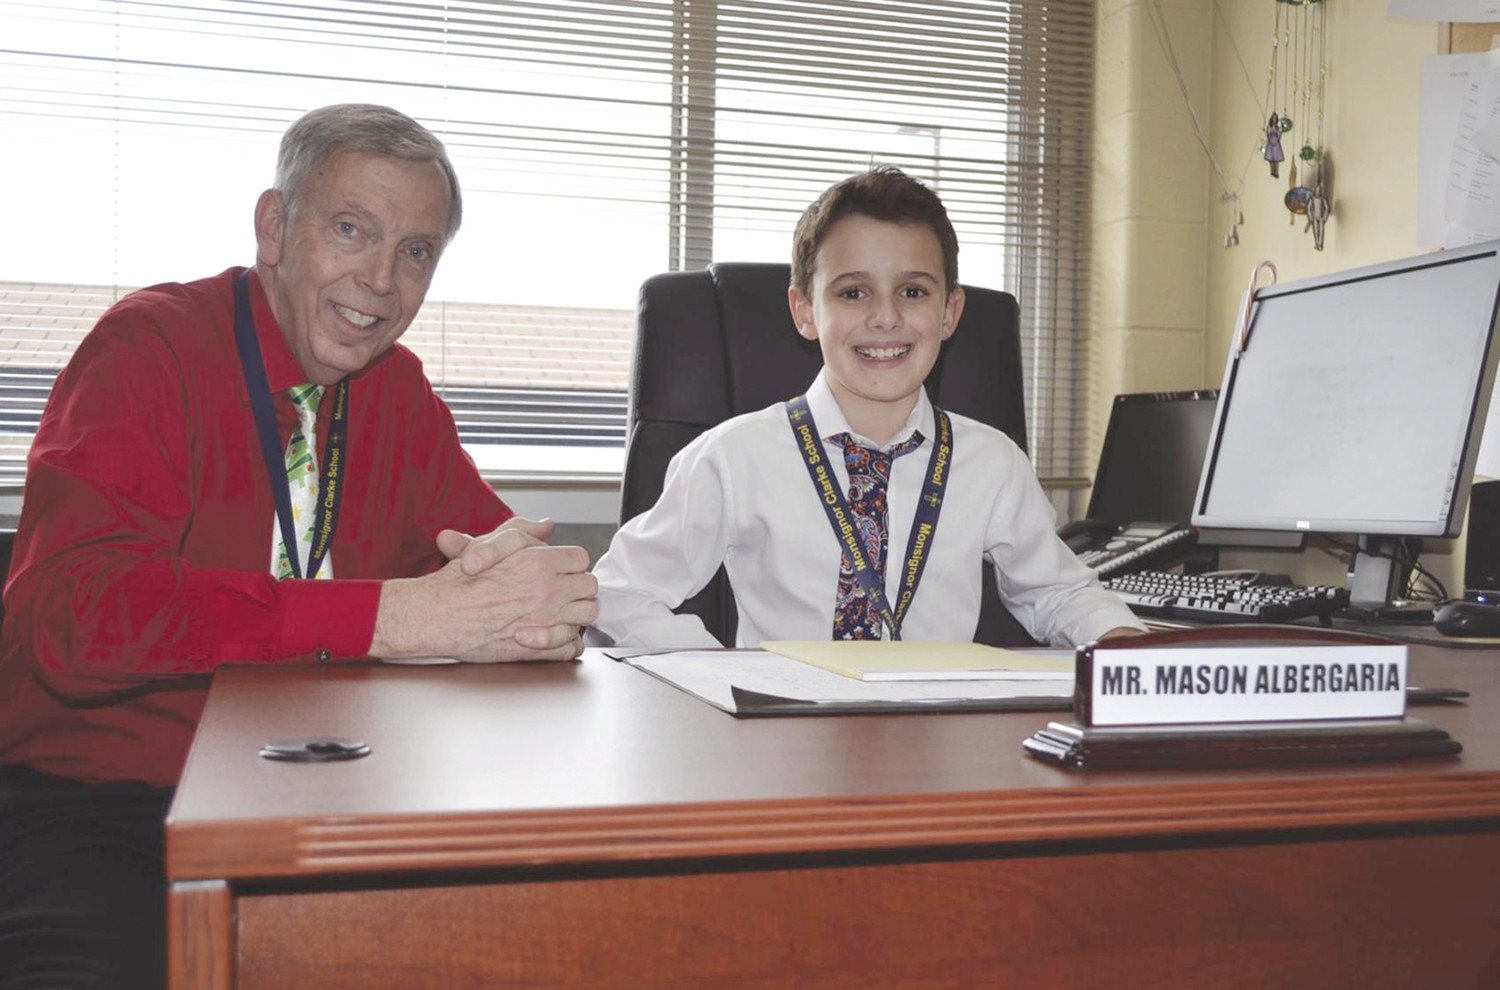 Joined by Dr. Arthur W. Lisi, principal, fifth grader Mason Albergaia smiles as he enjoys being “Principal of the Day.”